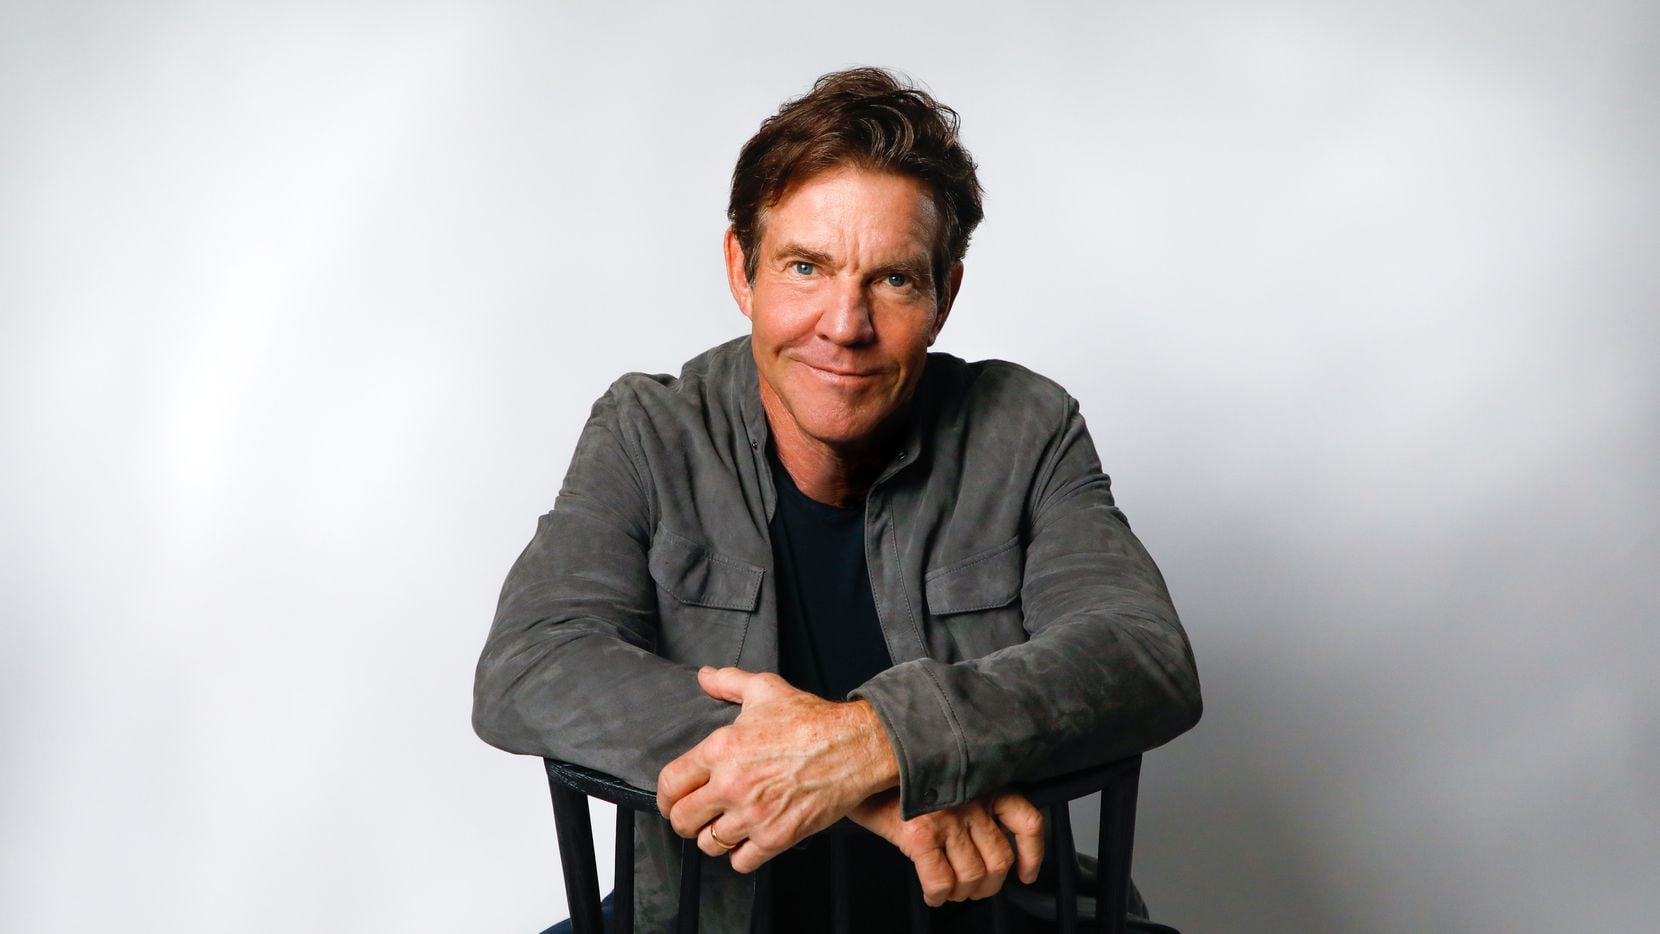 Dennis Quaid joins cast of Taylor Sheridan’s ‘1883: The Bass Reeves Story’